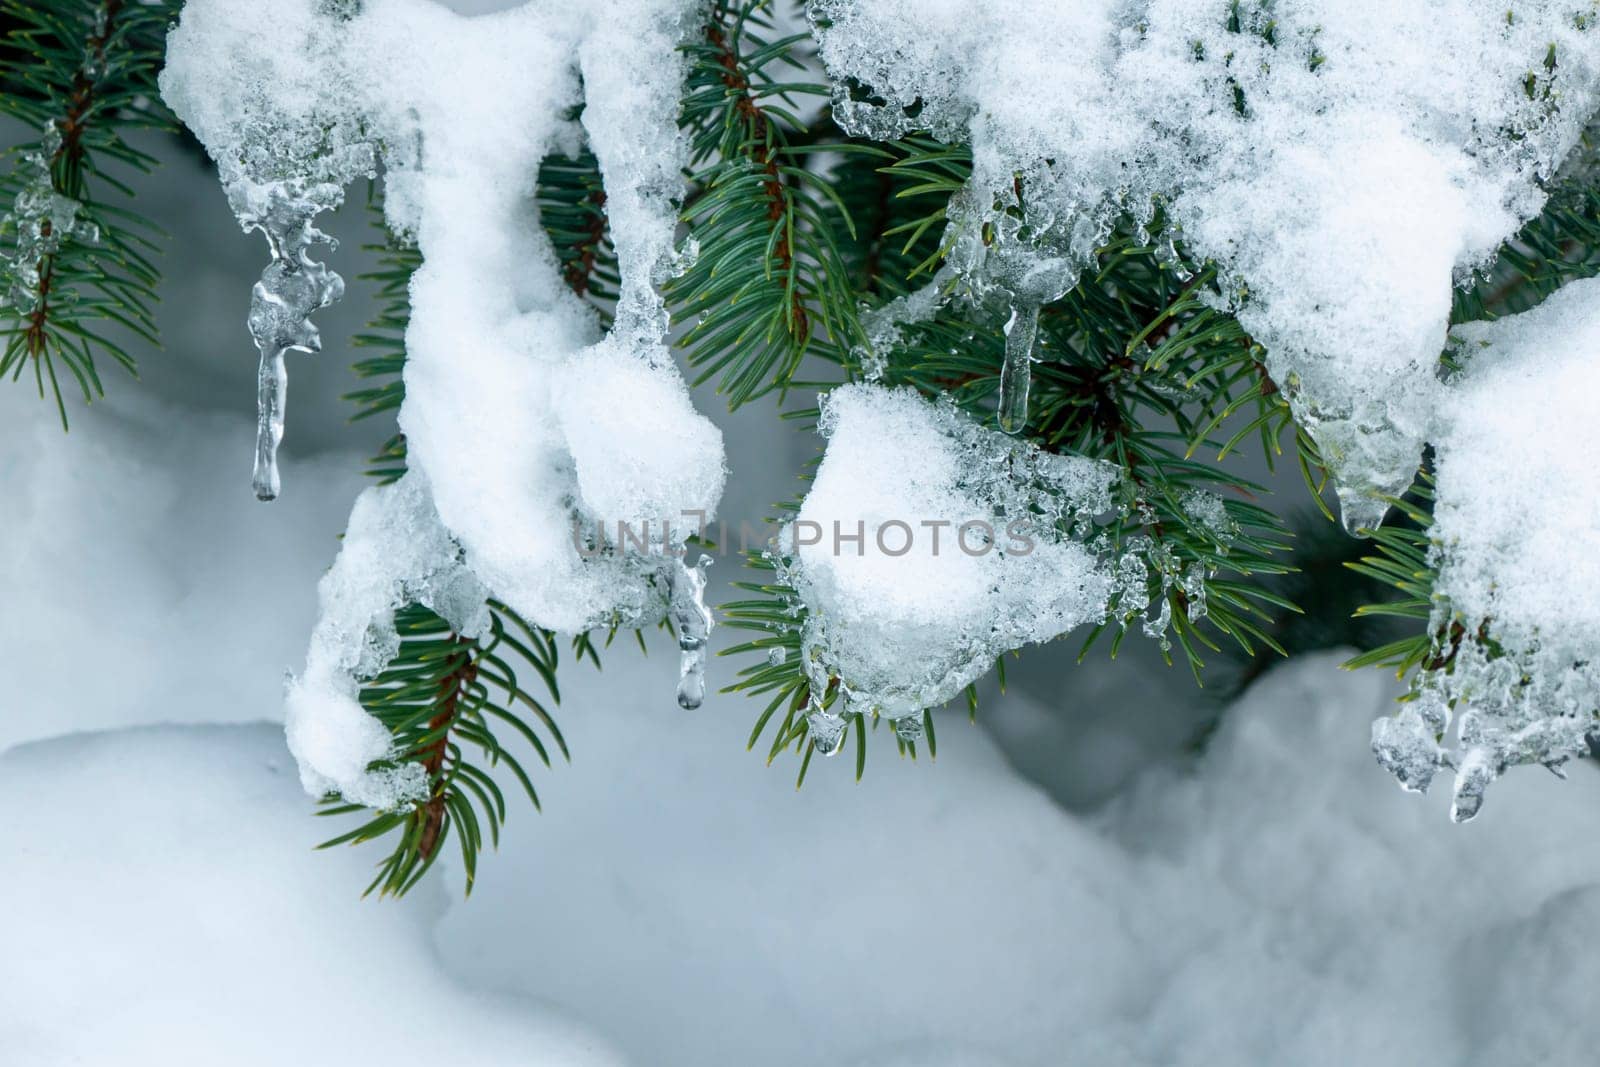 On a white background of snow. Green branches of the Christmas tree. frozen countryside scene in winter with snow. forest view, trees in ice